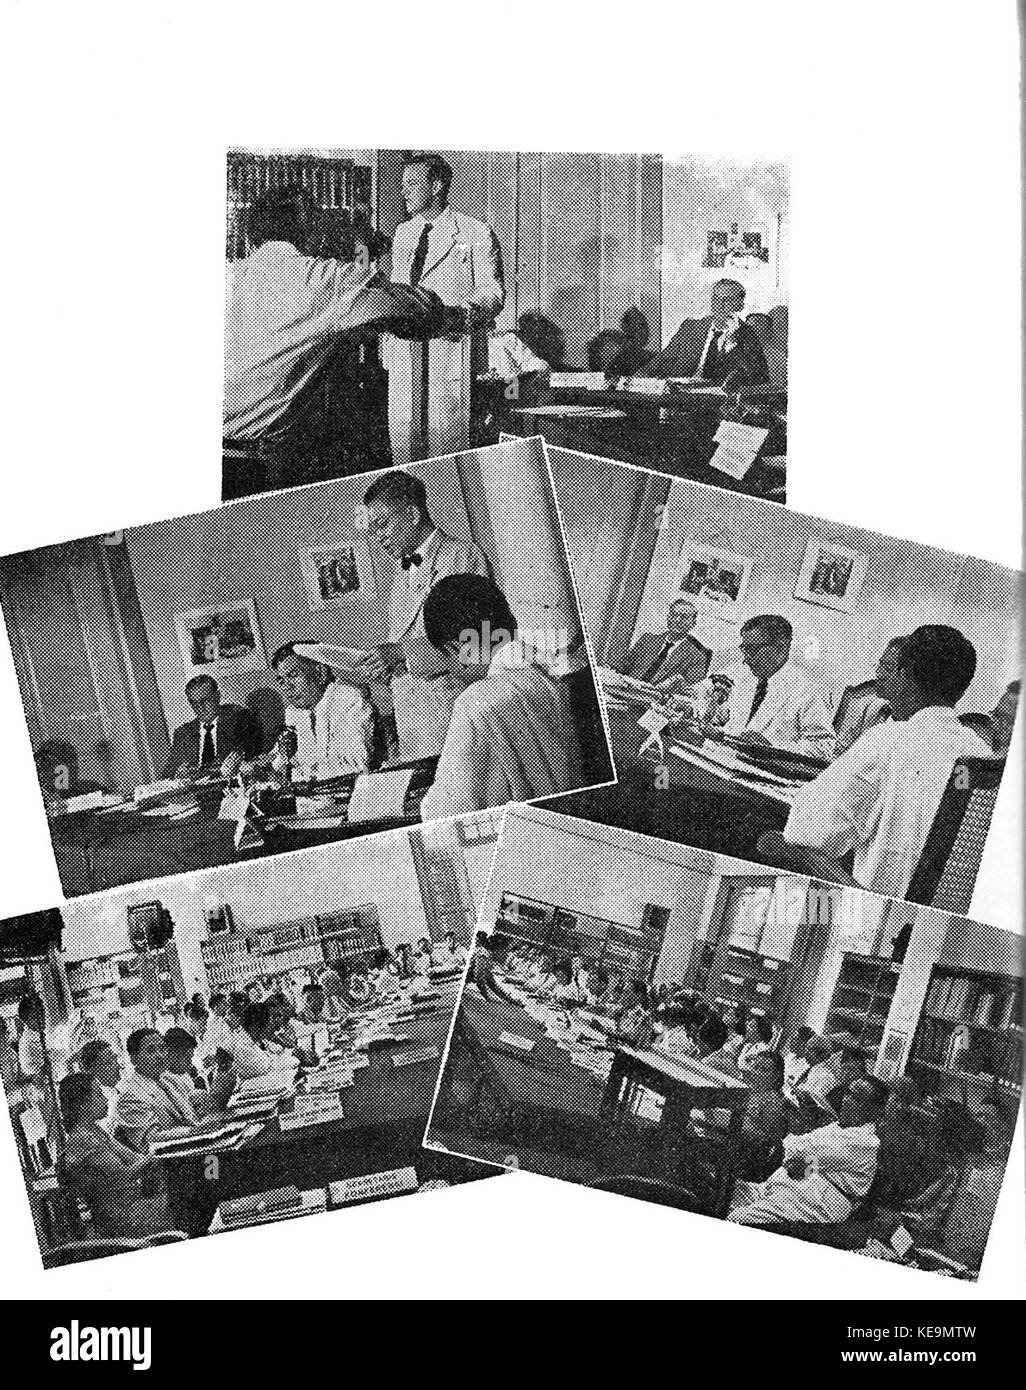 Images of the March 1954 library conference, Pekan Buku Indonesia 1954, p66 Stock Photo